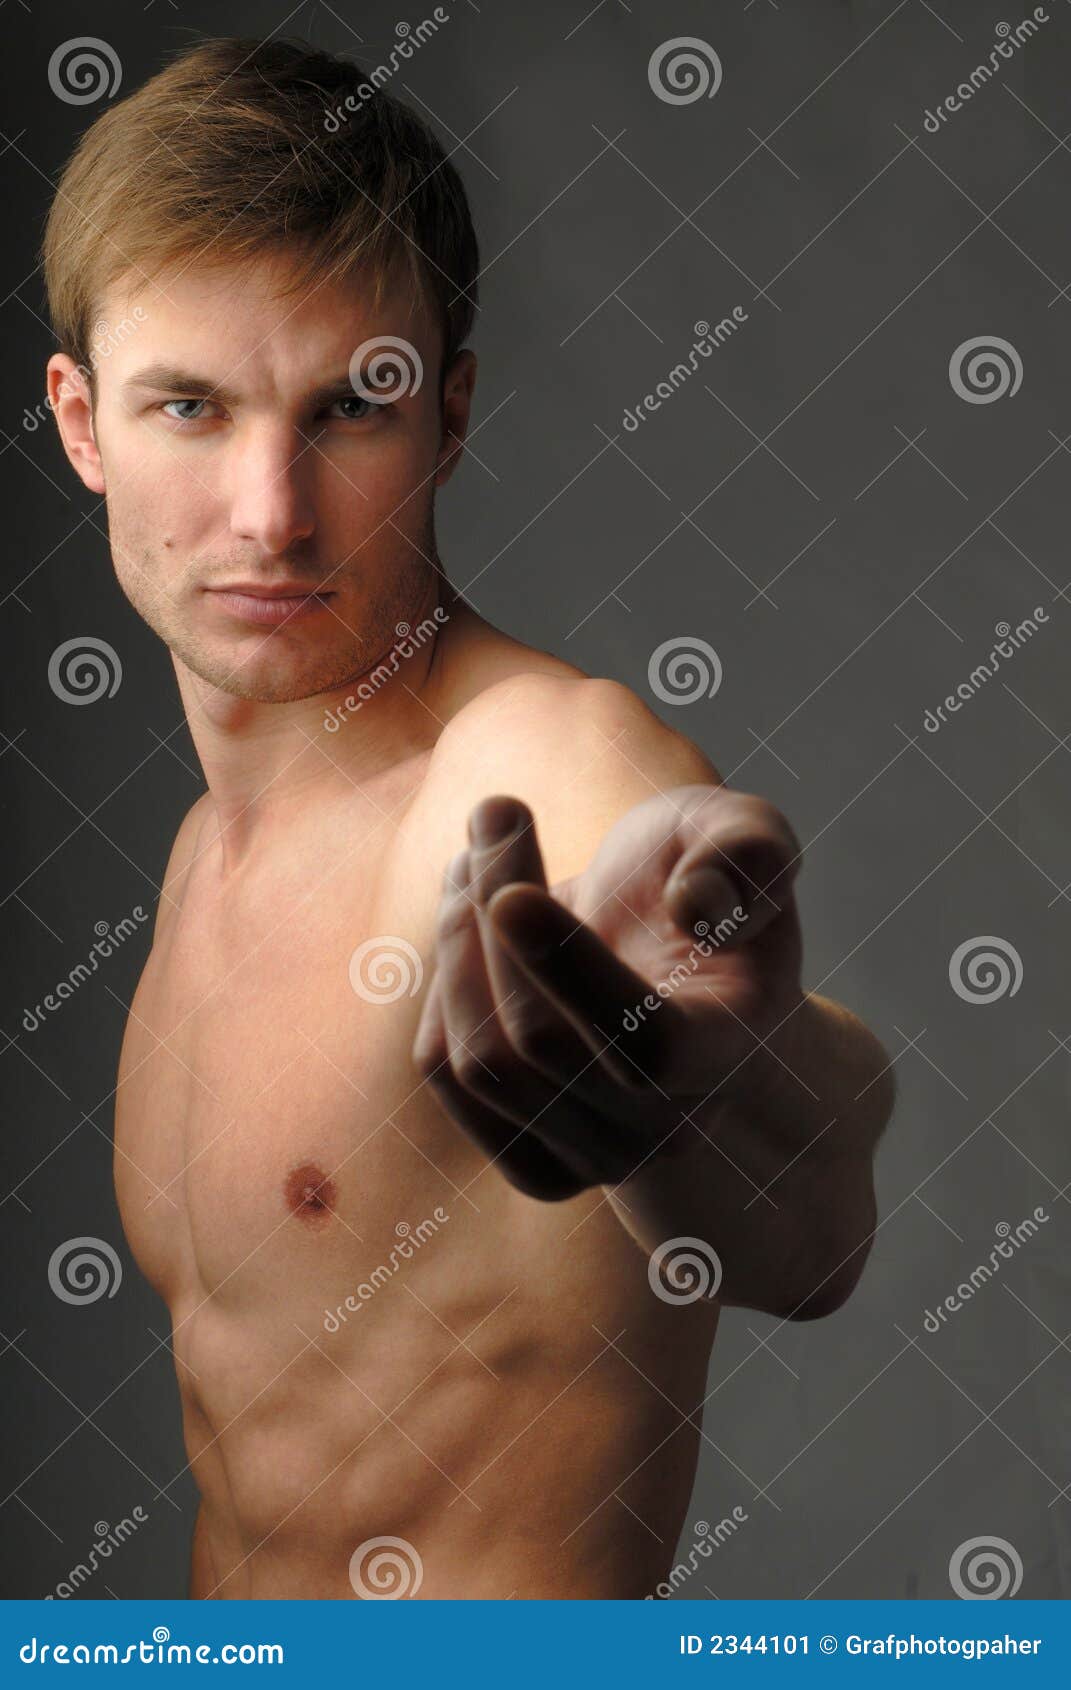 Muscular Male Torso And Hand Stock Image - Image: 2344101